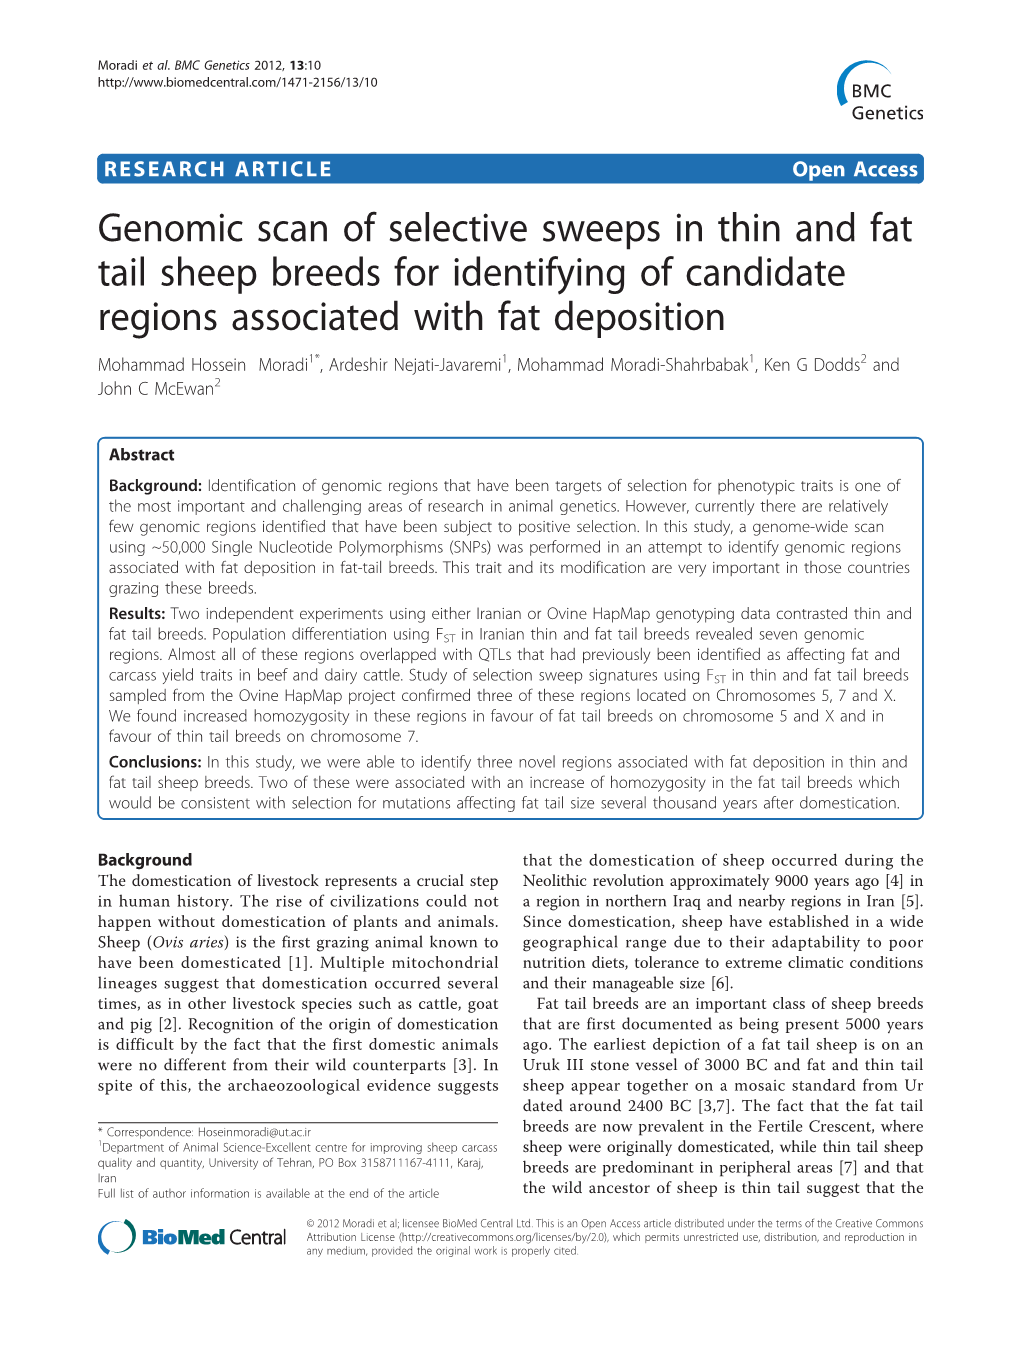 Genomic Scan of Selective Sweeps in Thin and Fat Tail Sheep Breeds For